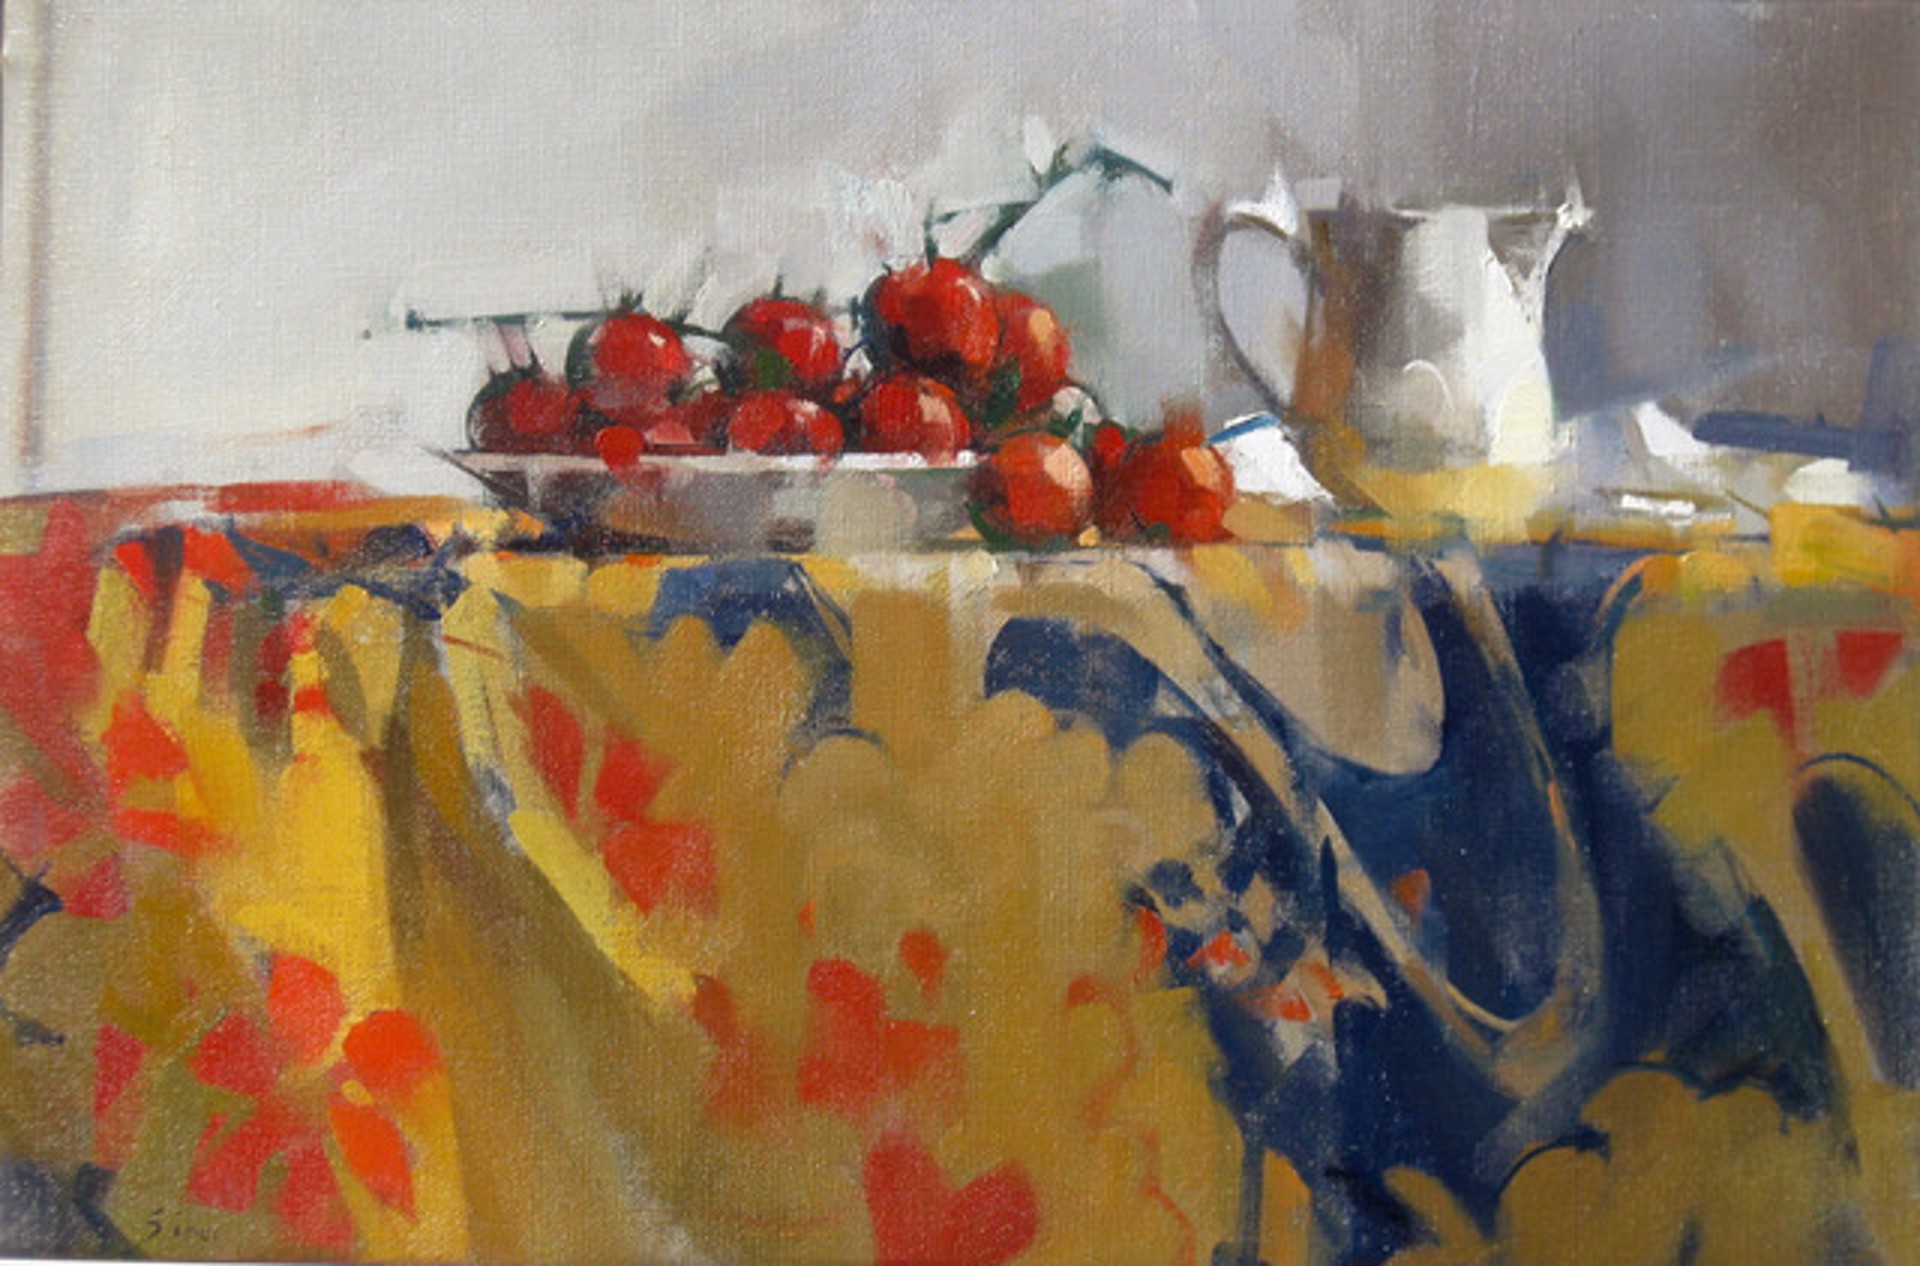 Cherry Tomatoes & Japanese Fabric by Maggie Siner